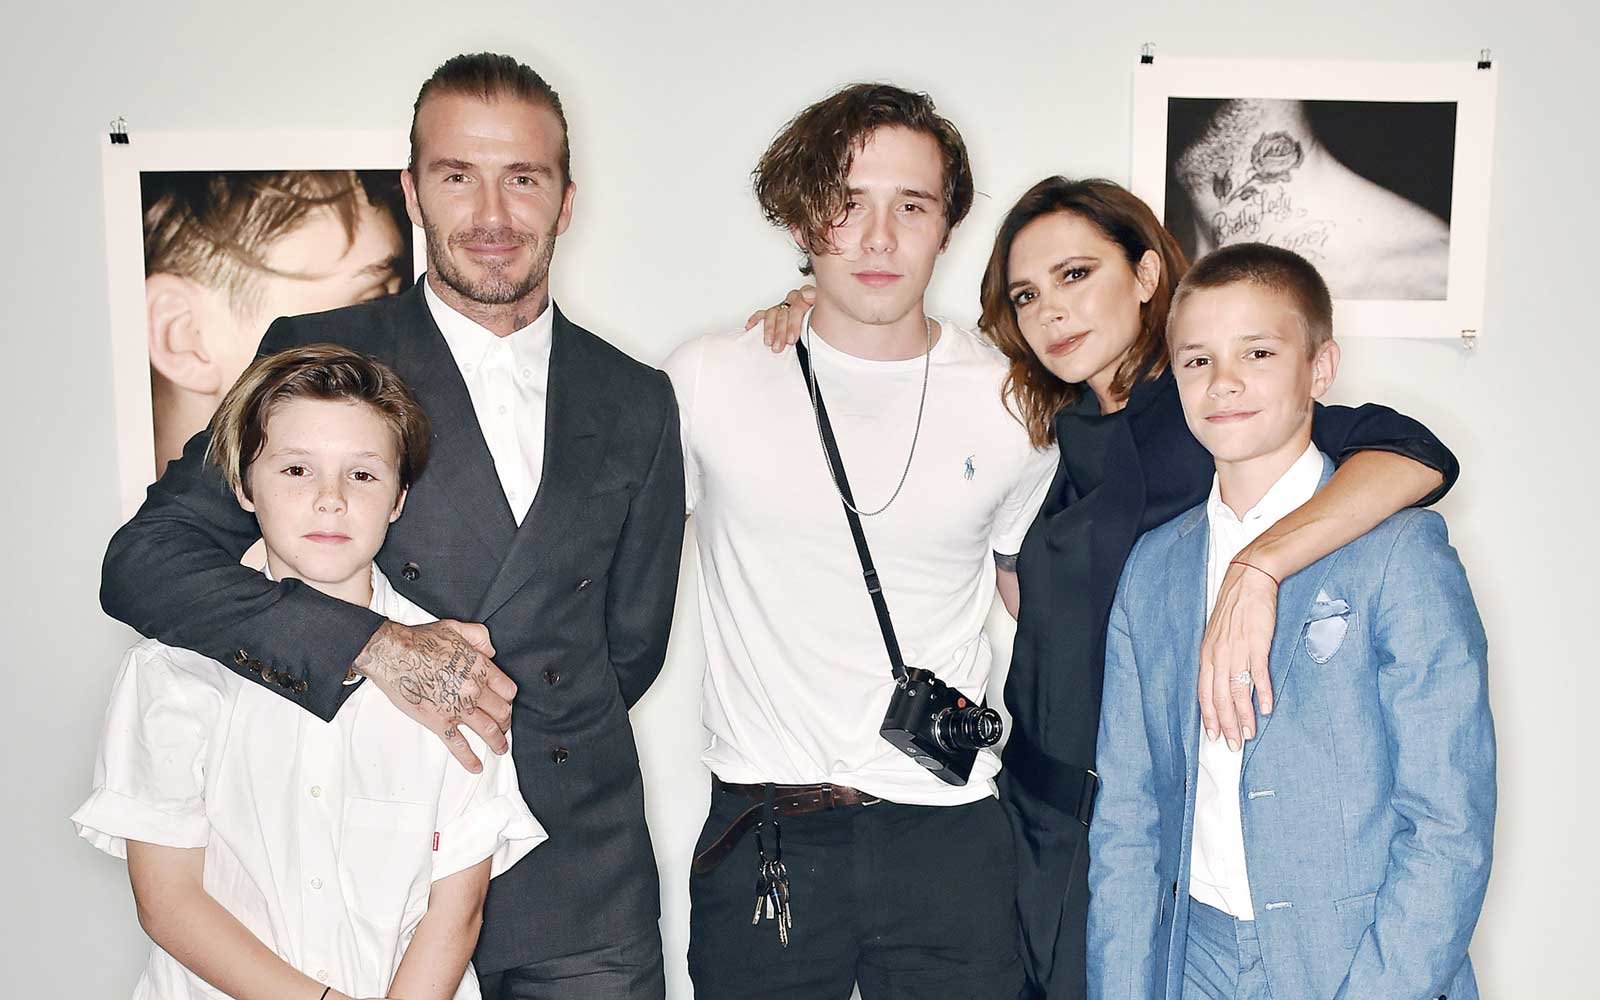 Brooklyn Beckham: 'What I See' exhibition and book launch at Christie's in partnership with Polo Ralph Lauren, New Bond Street, London, UK   27 Jun 2017